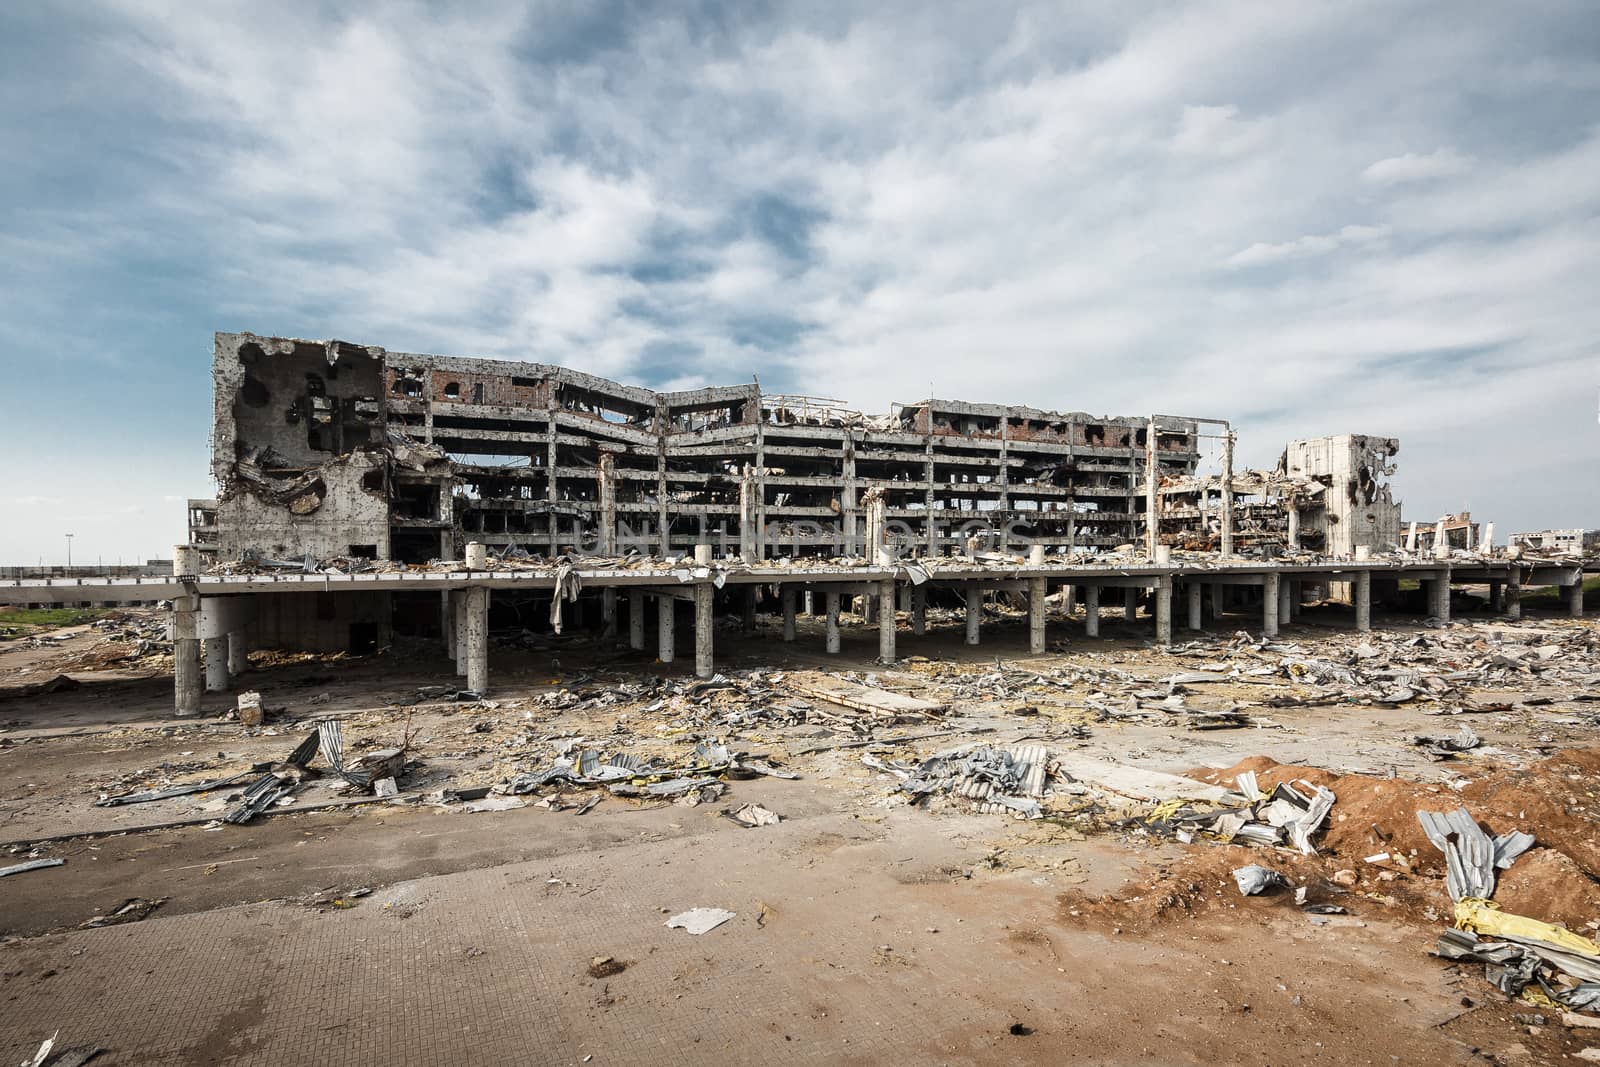 Wide Angle view of donetsk airport ruins after massive artillery shelling